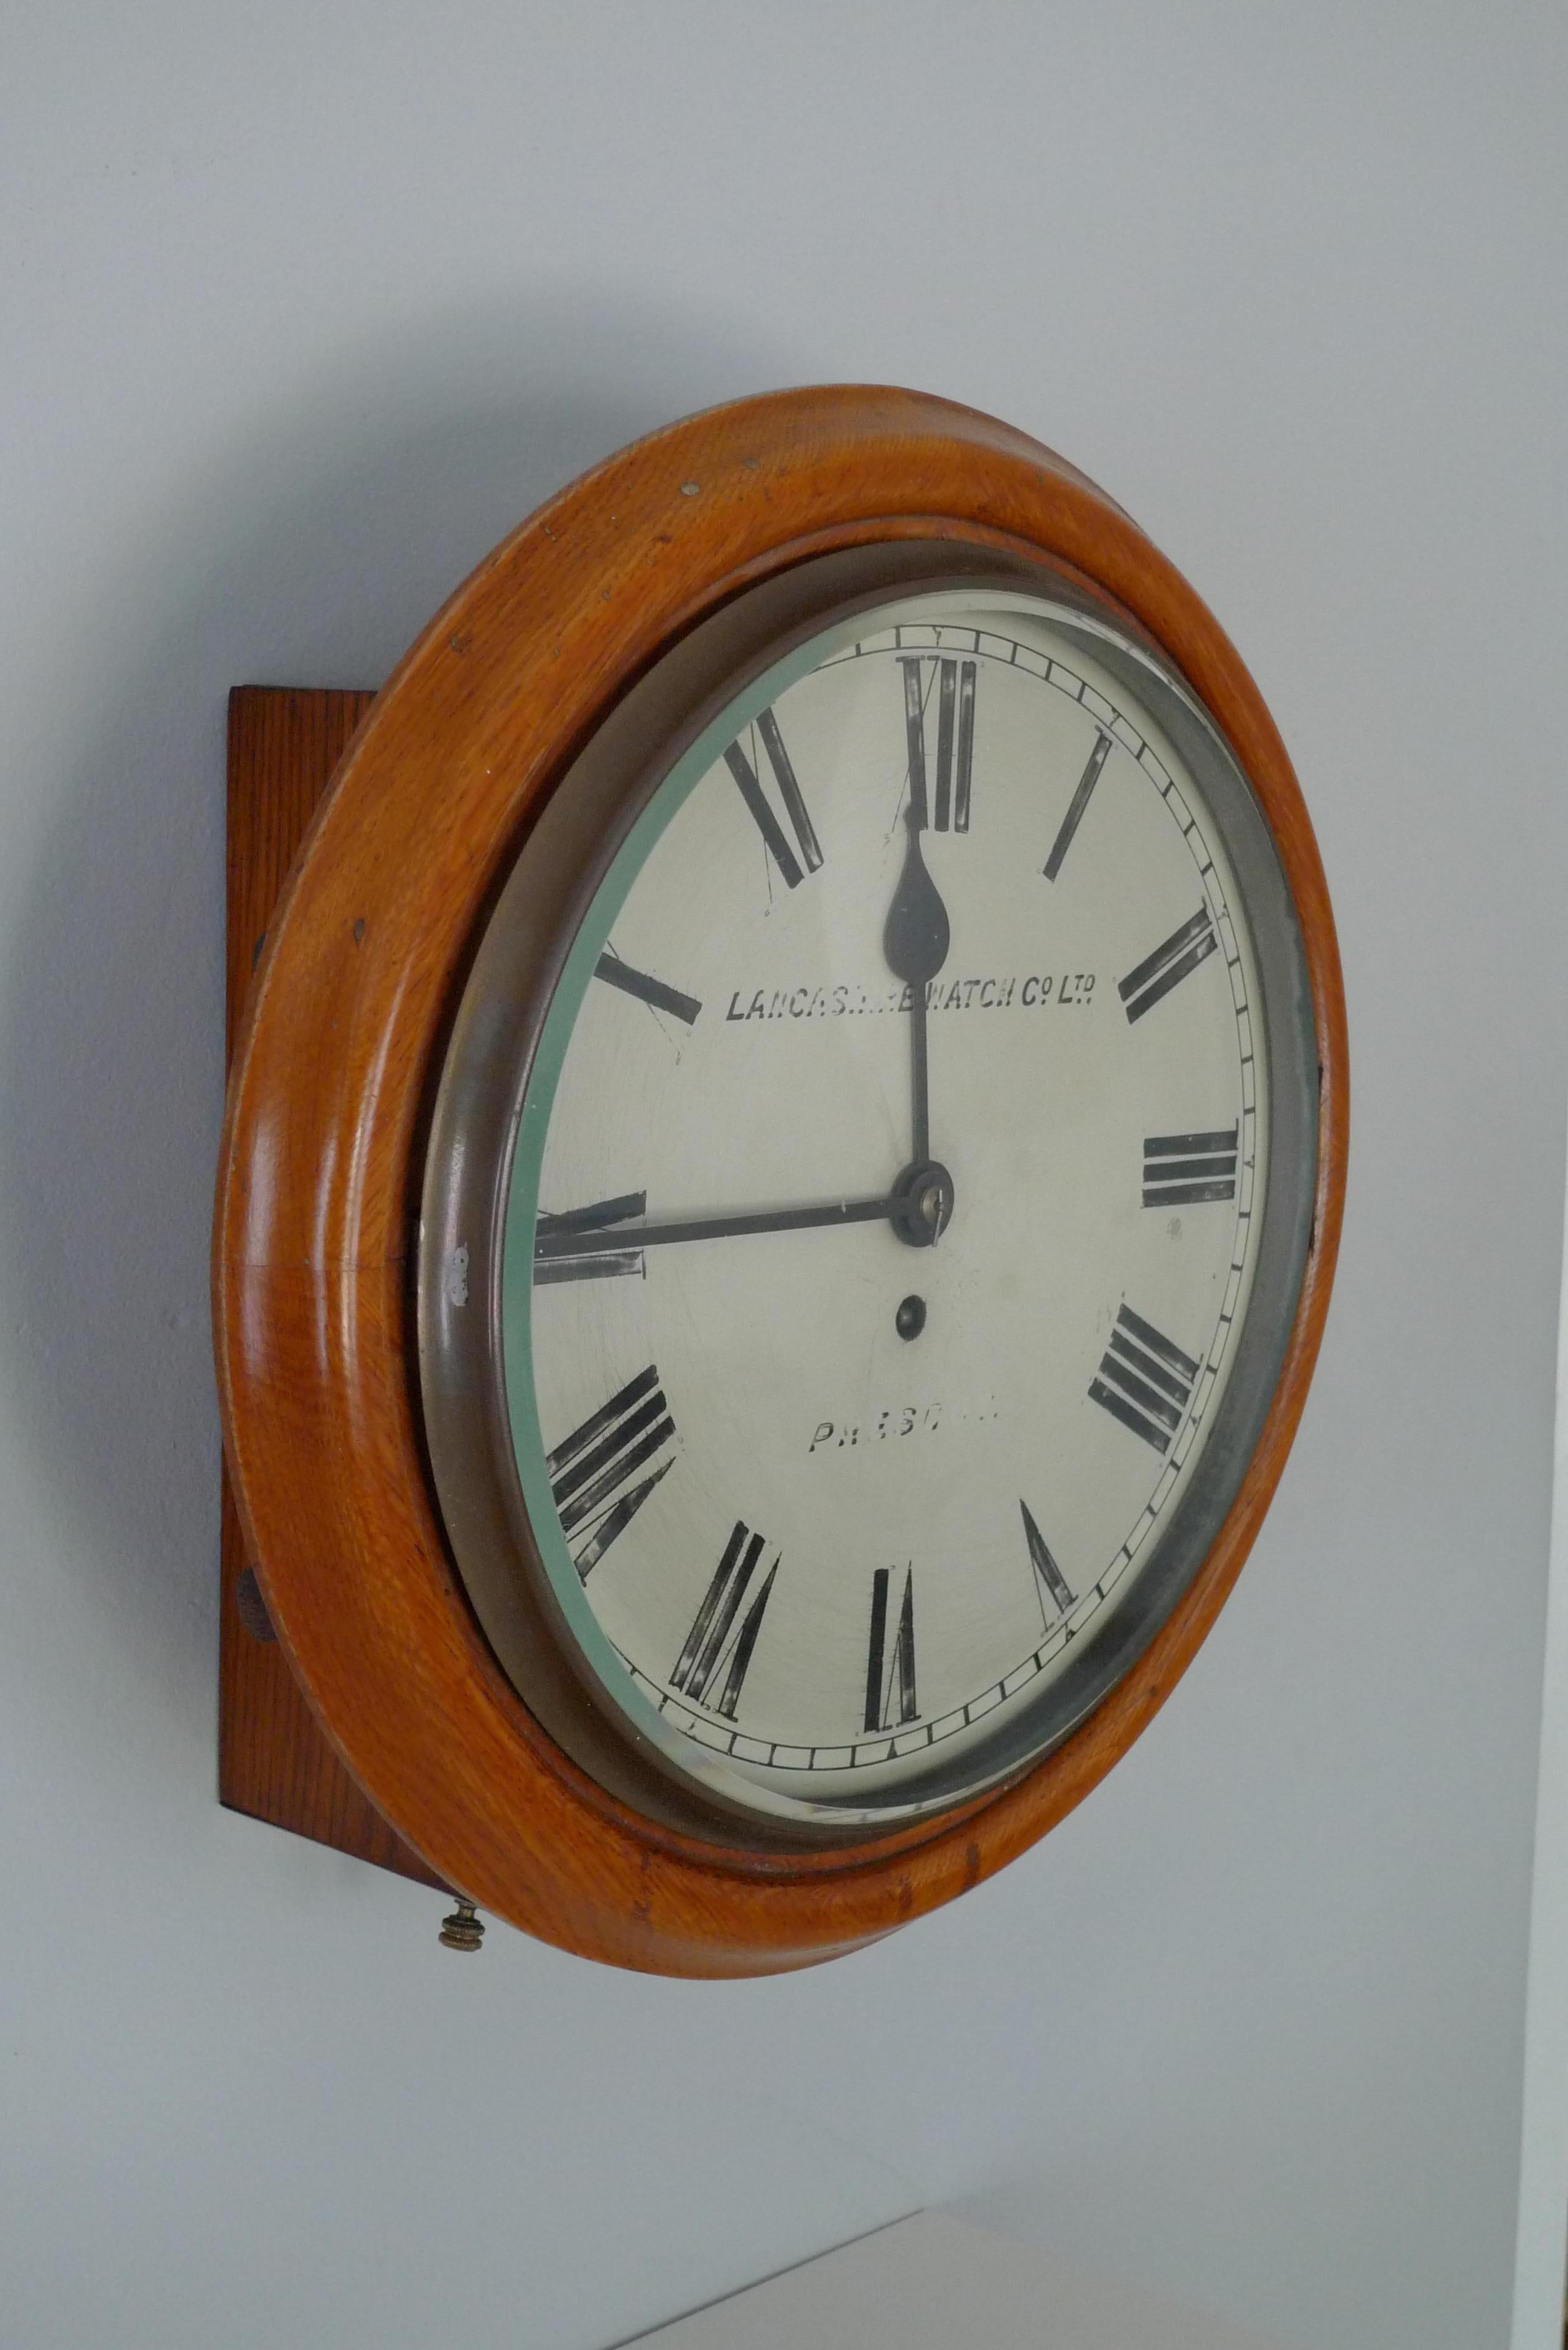 Beveled Wall clock by Lancashire Watch Co. from rail station, late 19th cent. Ships free For Sale